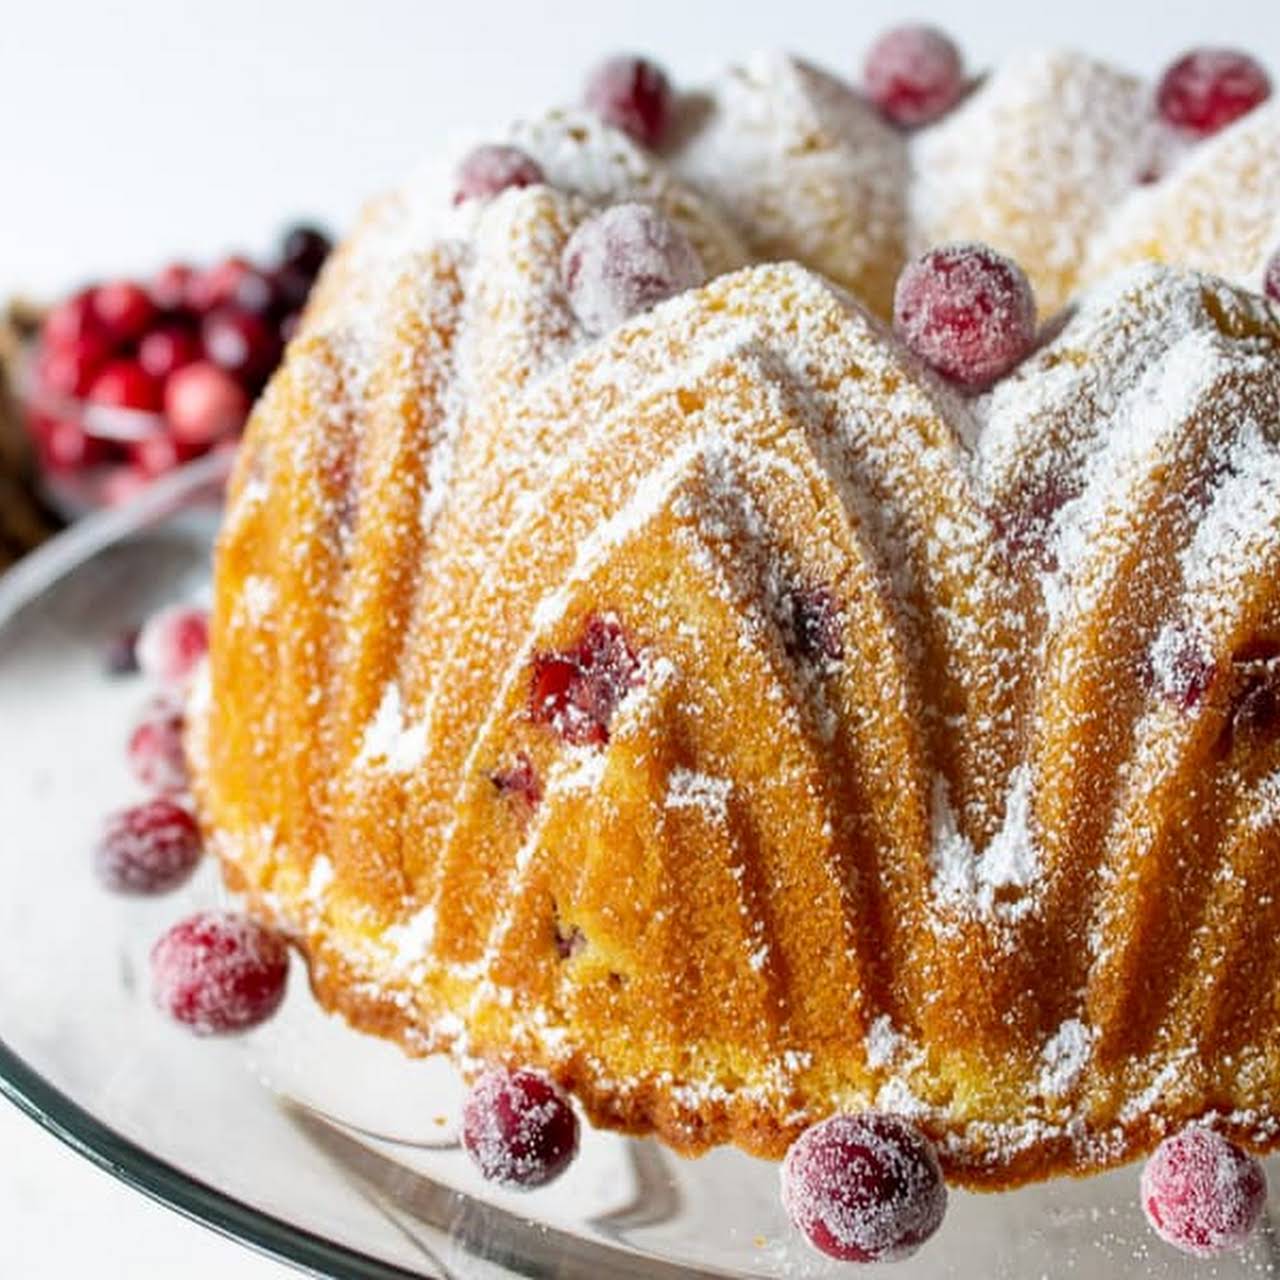 Christmas Bundt Cake - Moore or Less Cooking